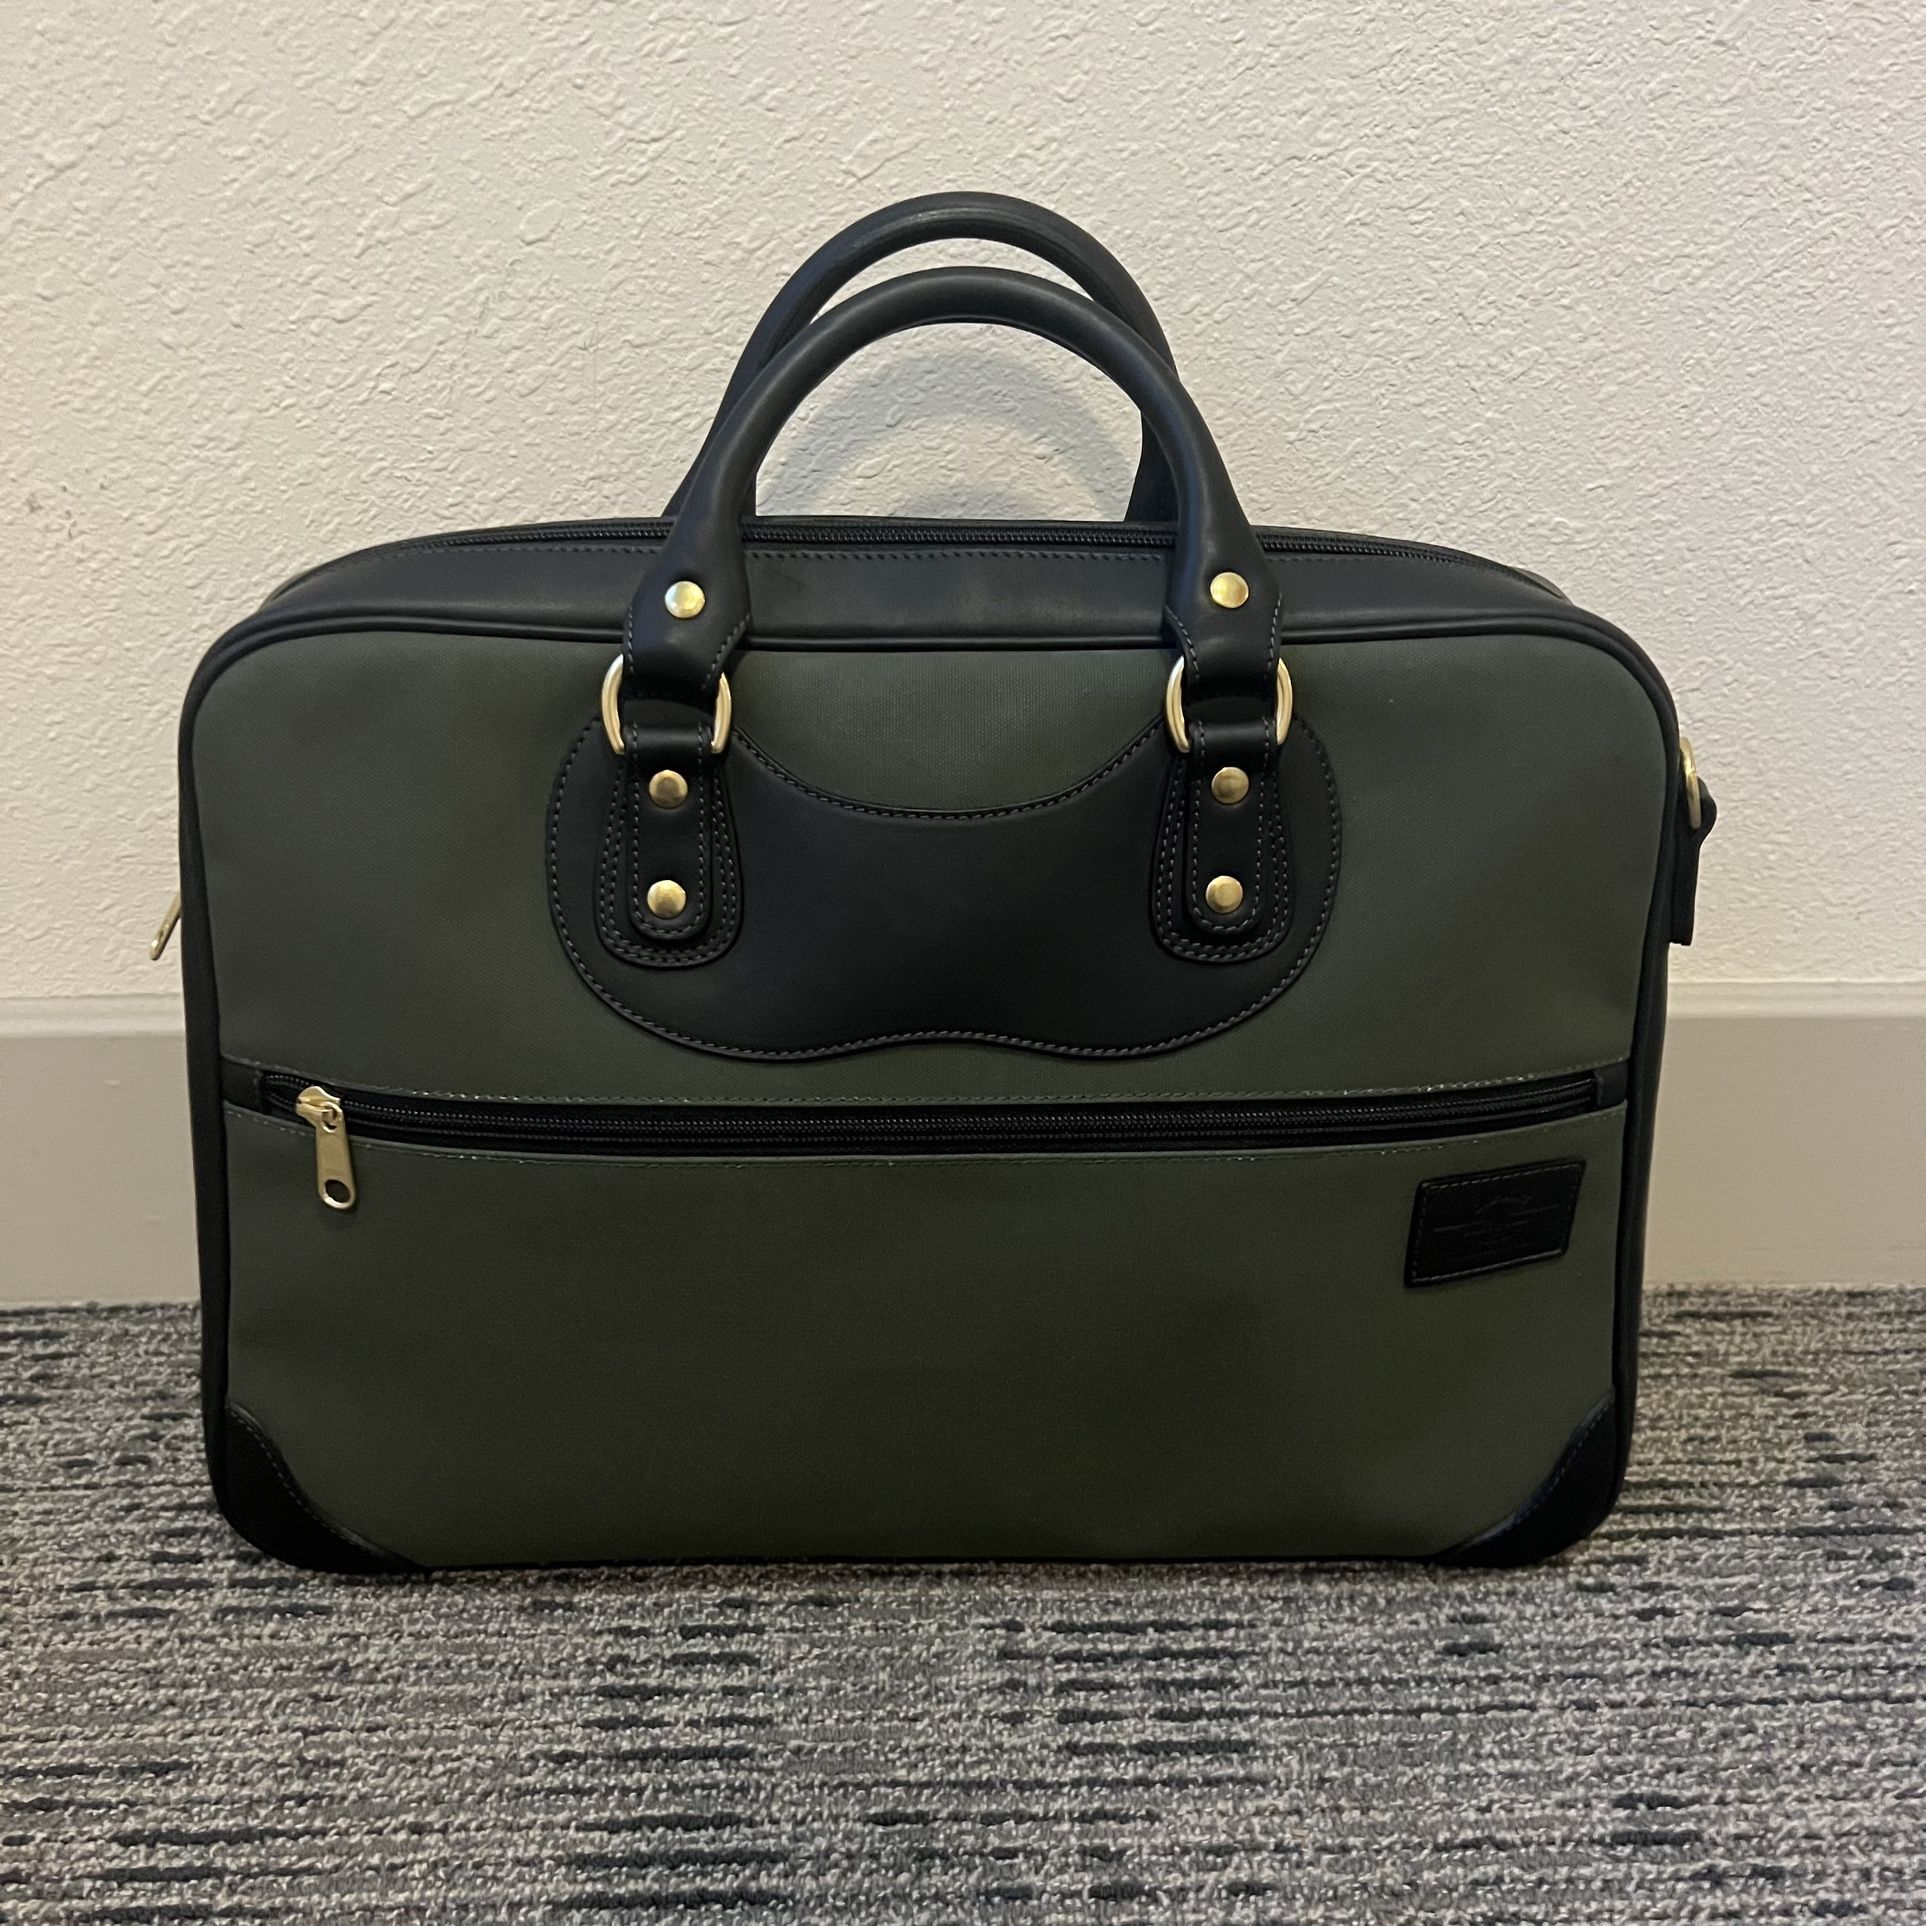 JPLC J. Panther Luggage Co. Courier Ruc Case olive canvas black leather 13x3x19.5’’ *retails $800